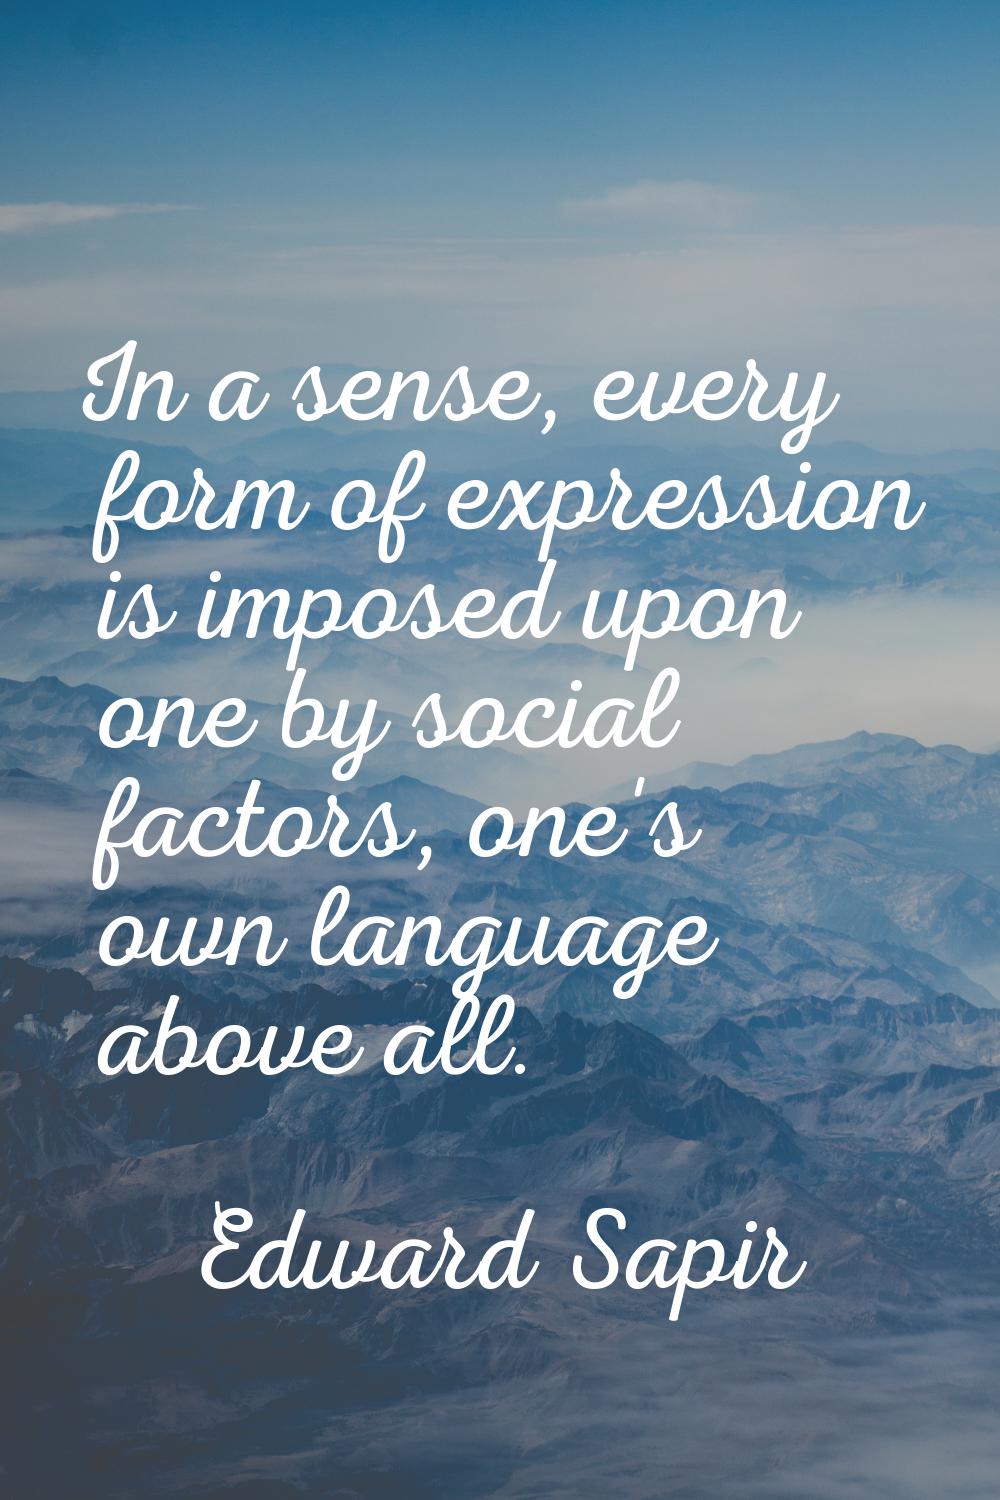 In a sense, every form of expression is imposed upon one by social factors, one's own language abov